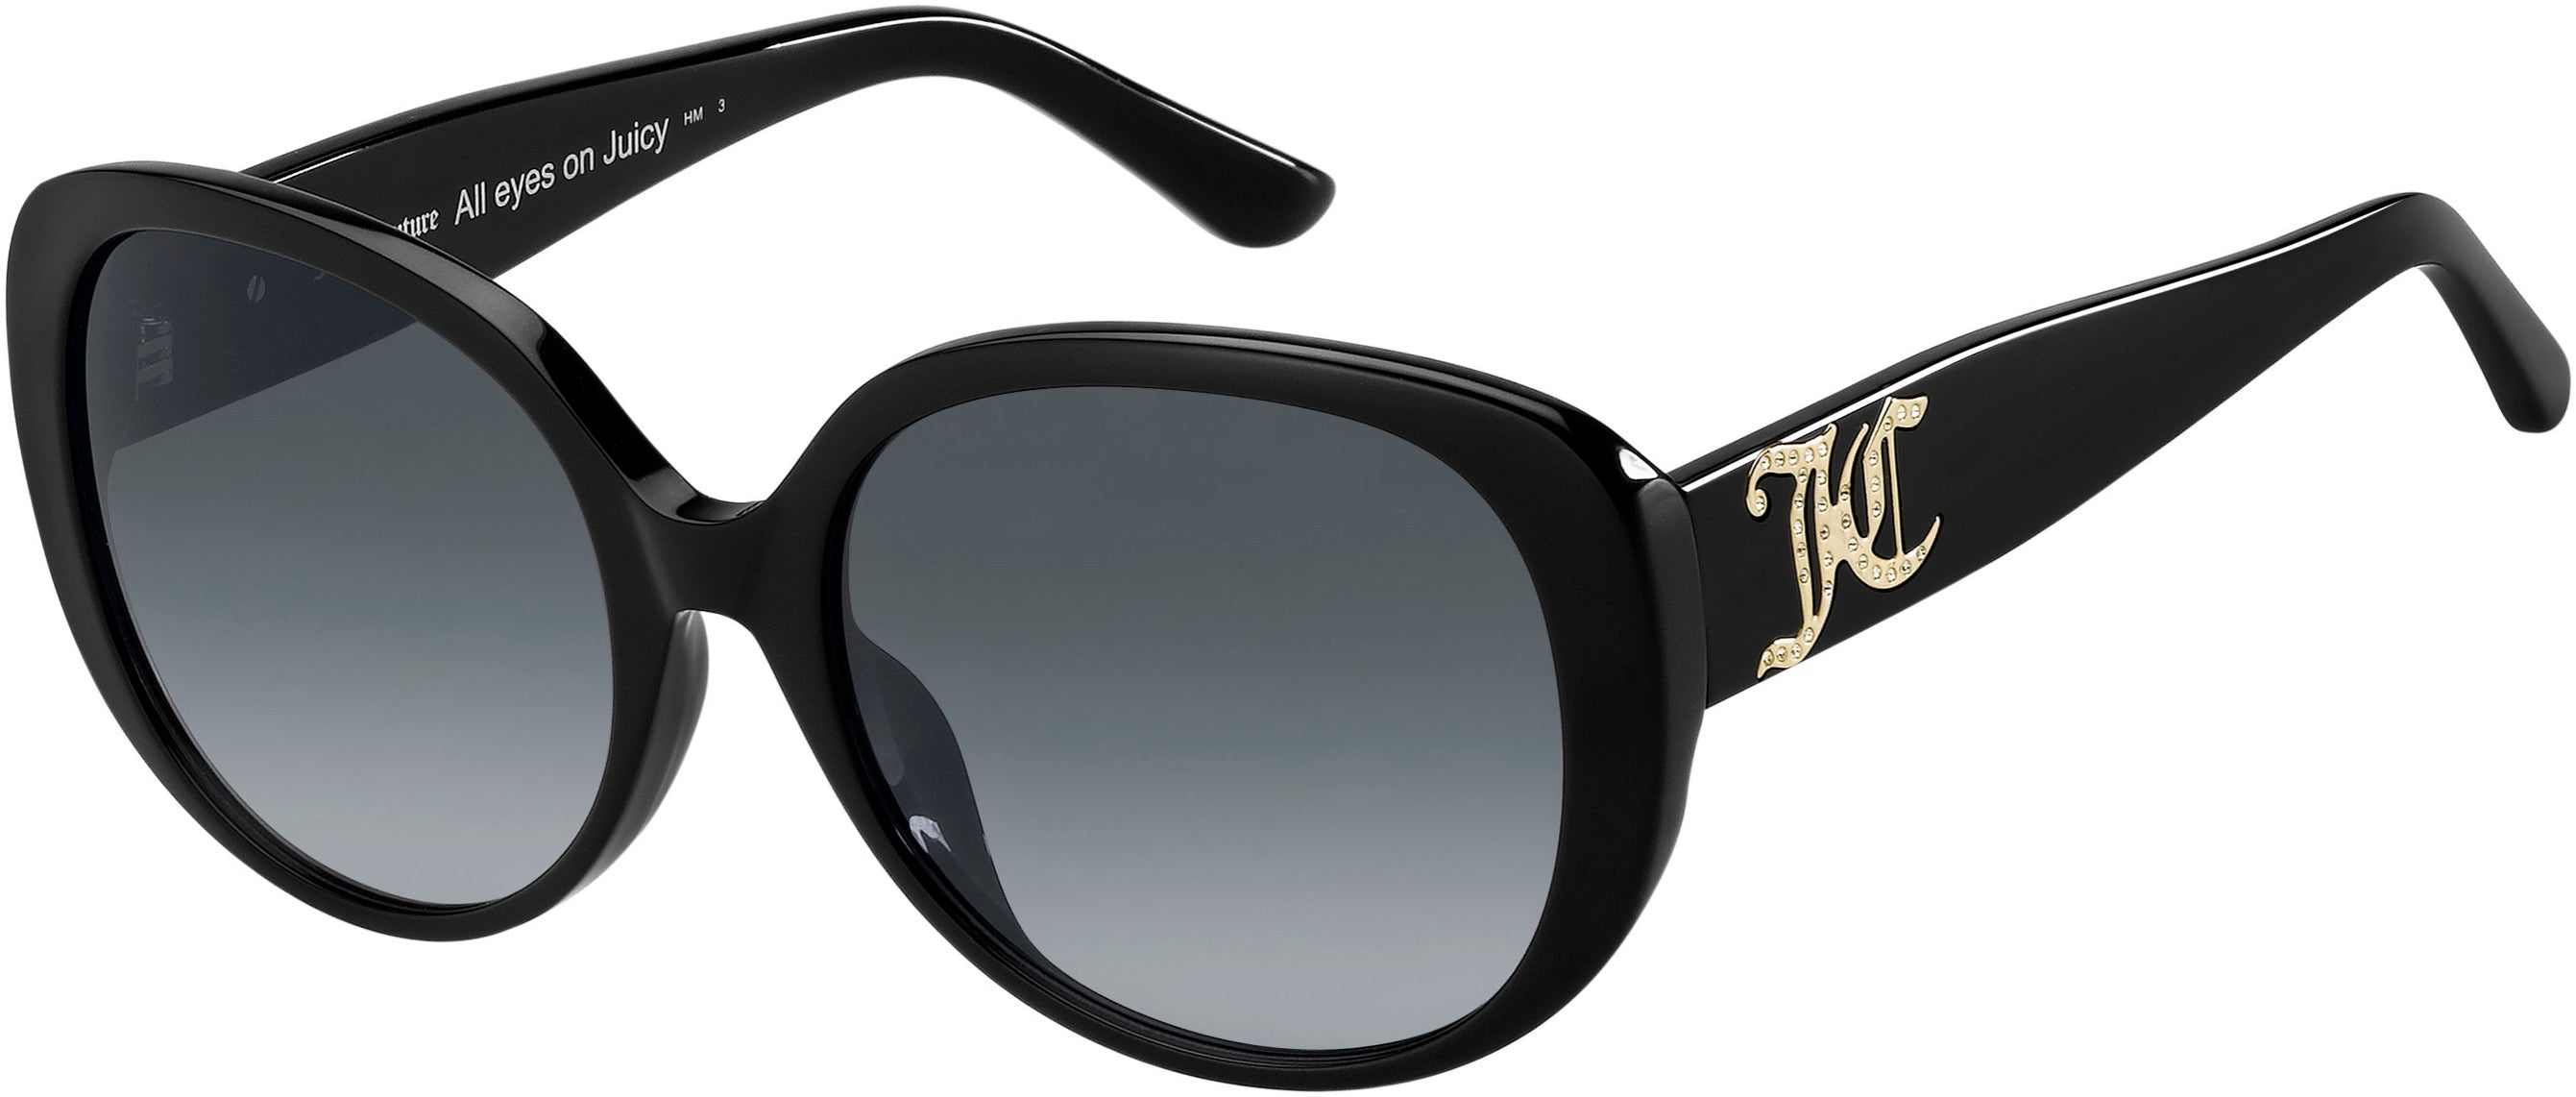 Juicy Couture Juicy 614/S Oval Modified Sunglasses 0807-0807  Black (9O Dark Gray Gradient)